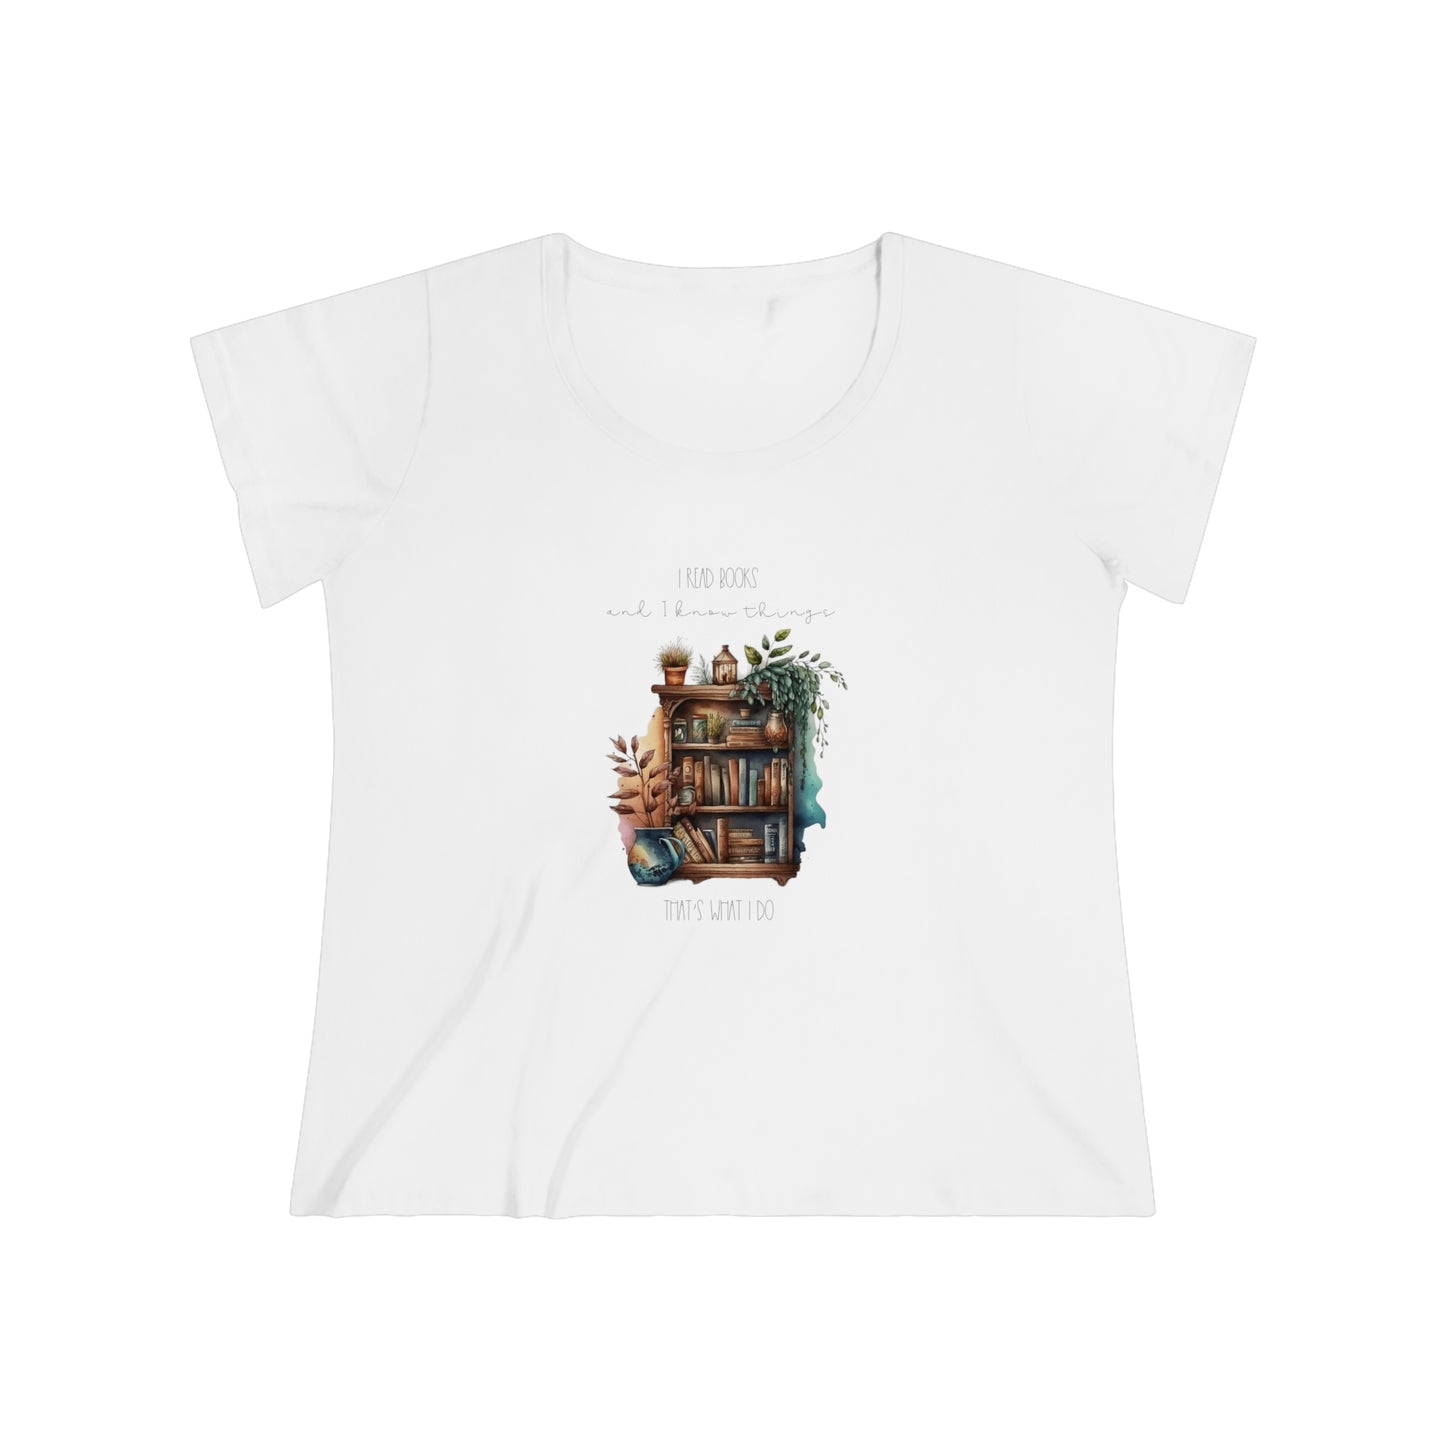 Women's Curvy Tee “I read books and I know things. That’s what I do.”